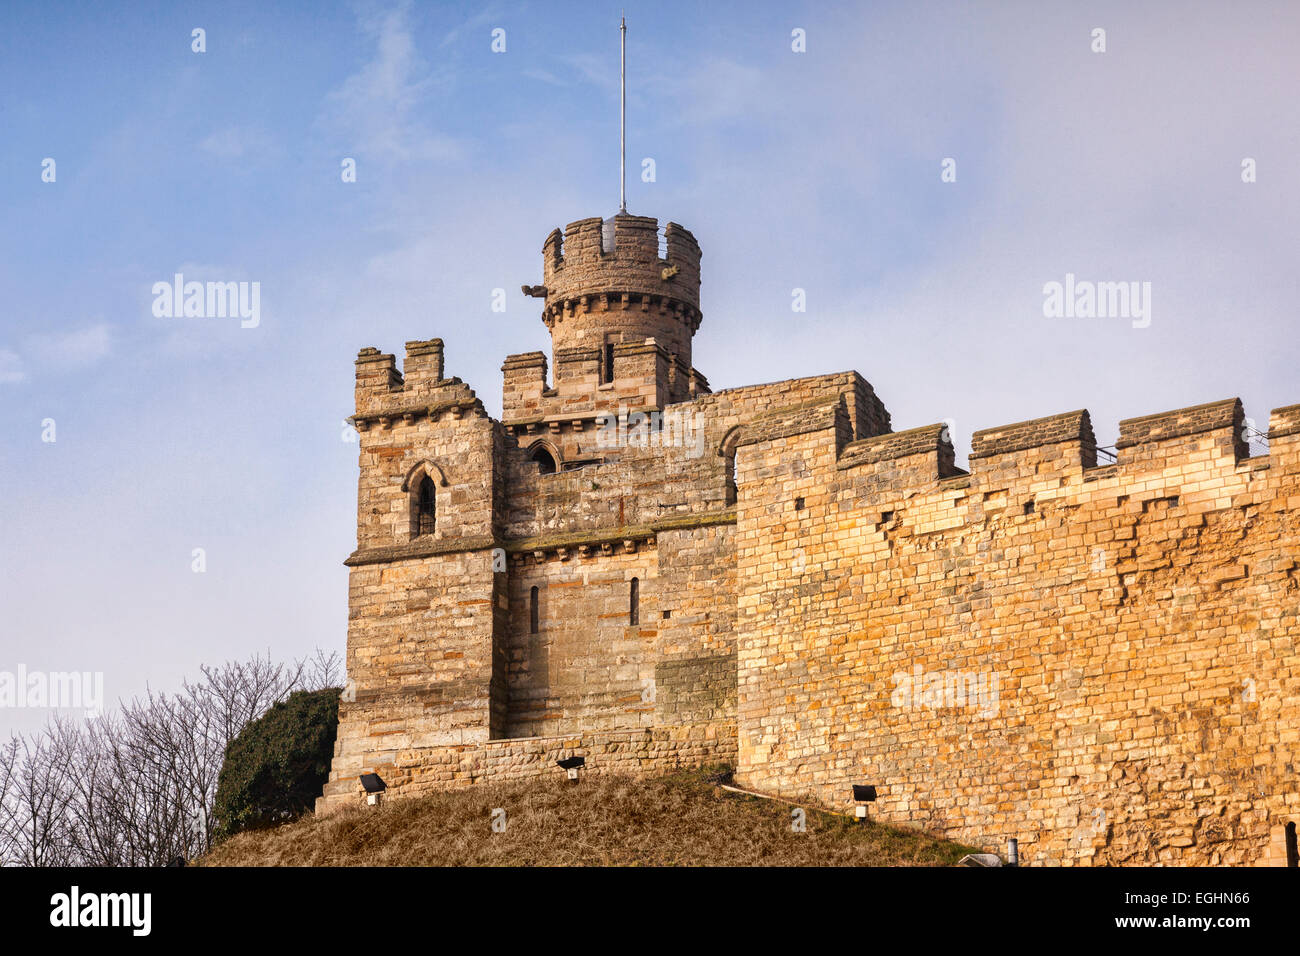 Lincoln Castle, Castle Hill, Lincoln, Lincolnshire, England, UK, built in the 11th century by William the Conquerer on the... Stock Photo